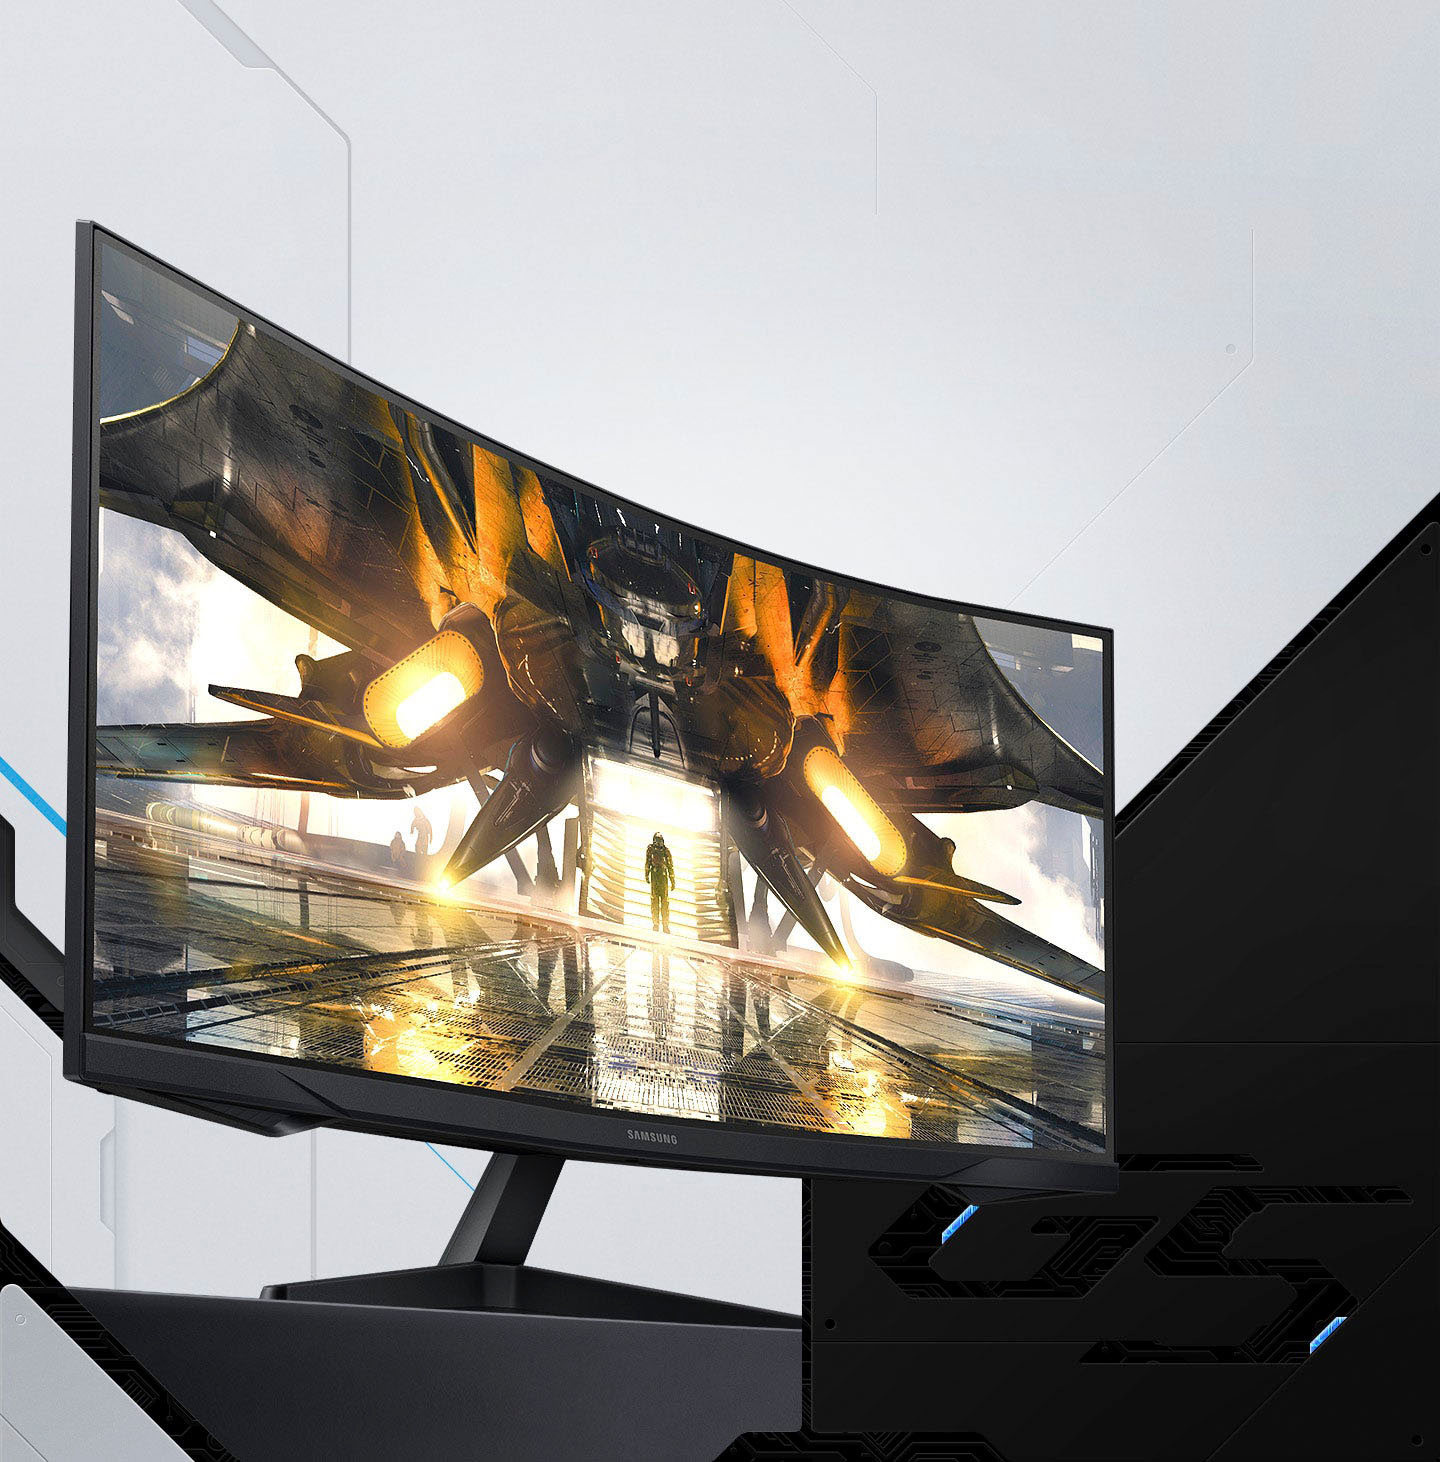 Pick up the Samsung Odyssey G5 27-in 1440p 165Hz gaming monitor for £209